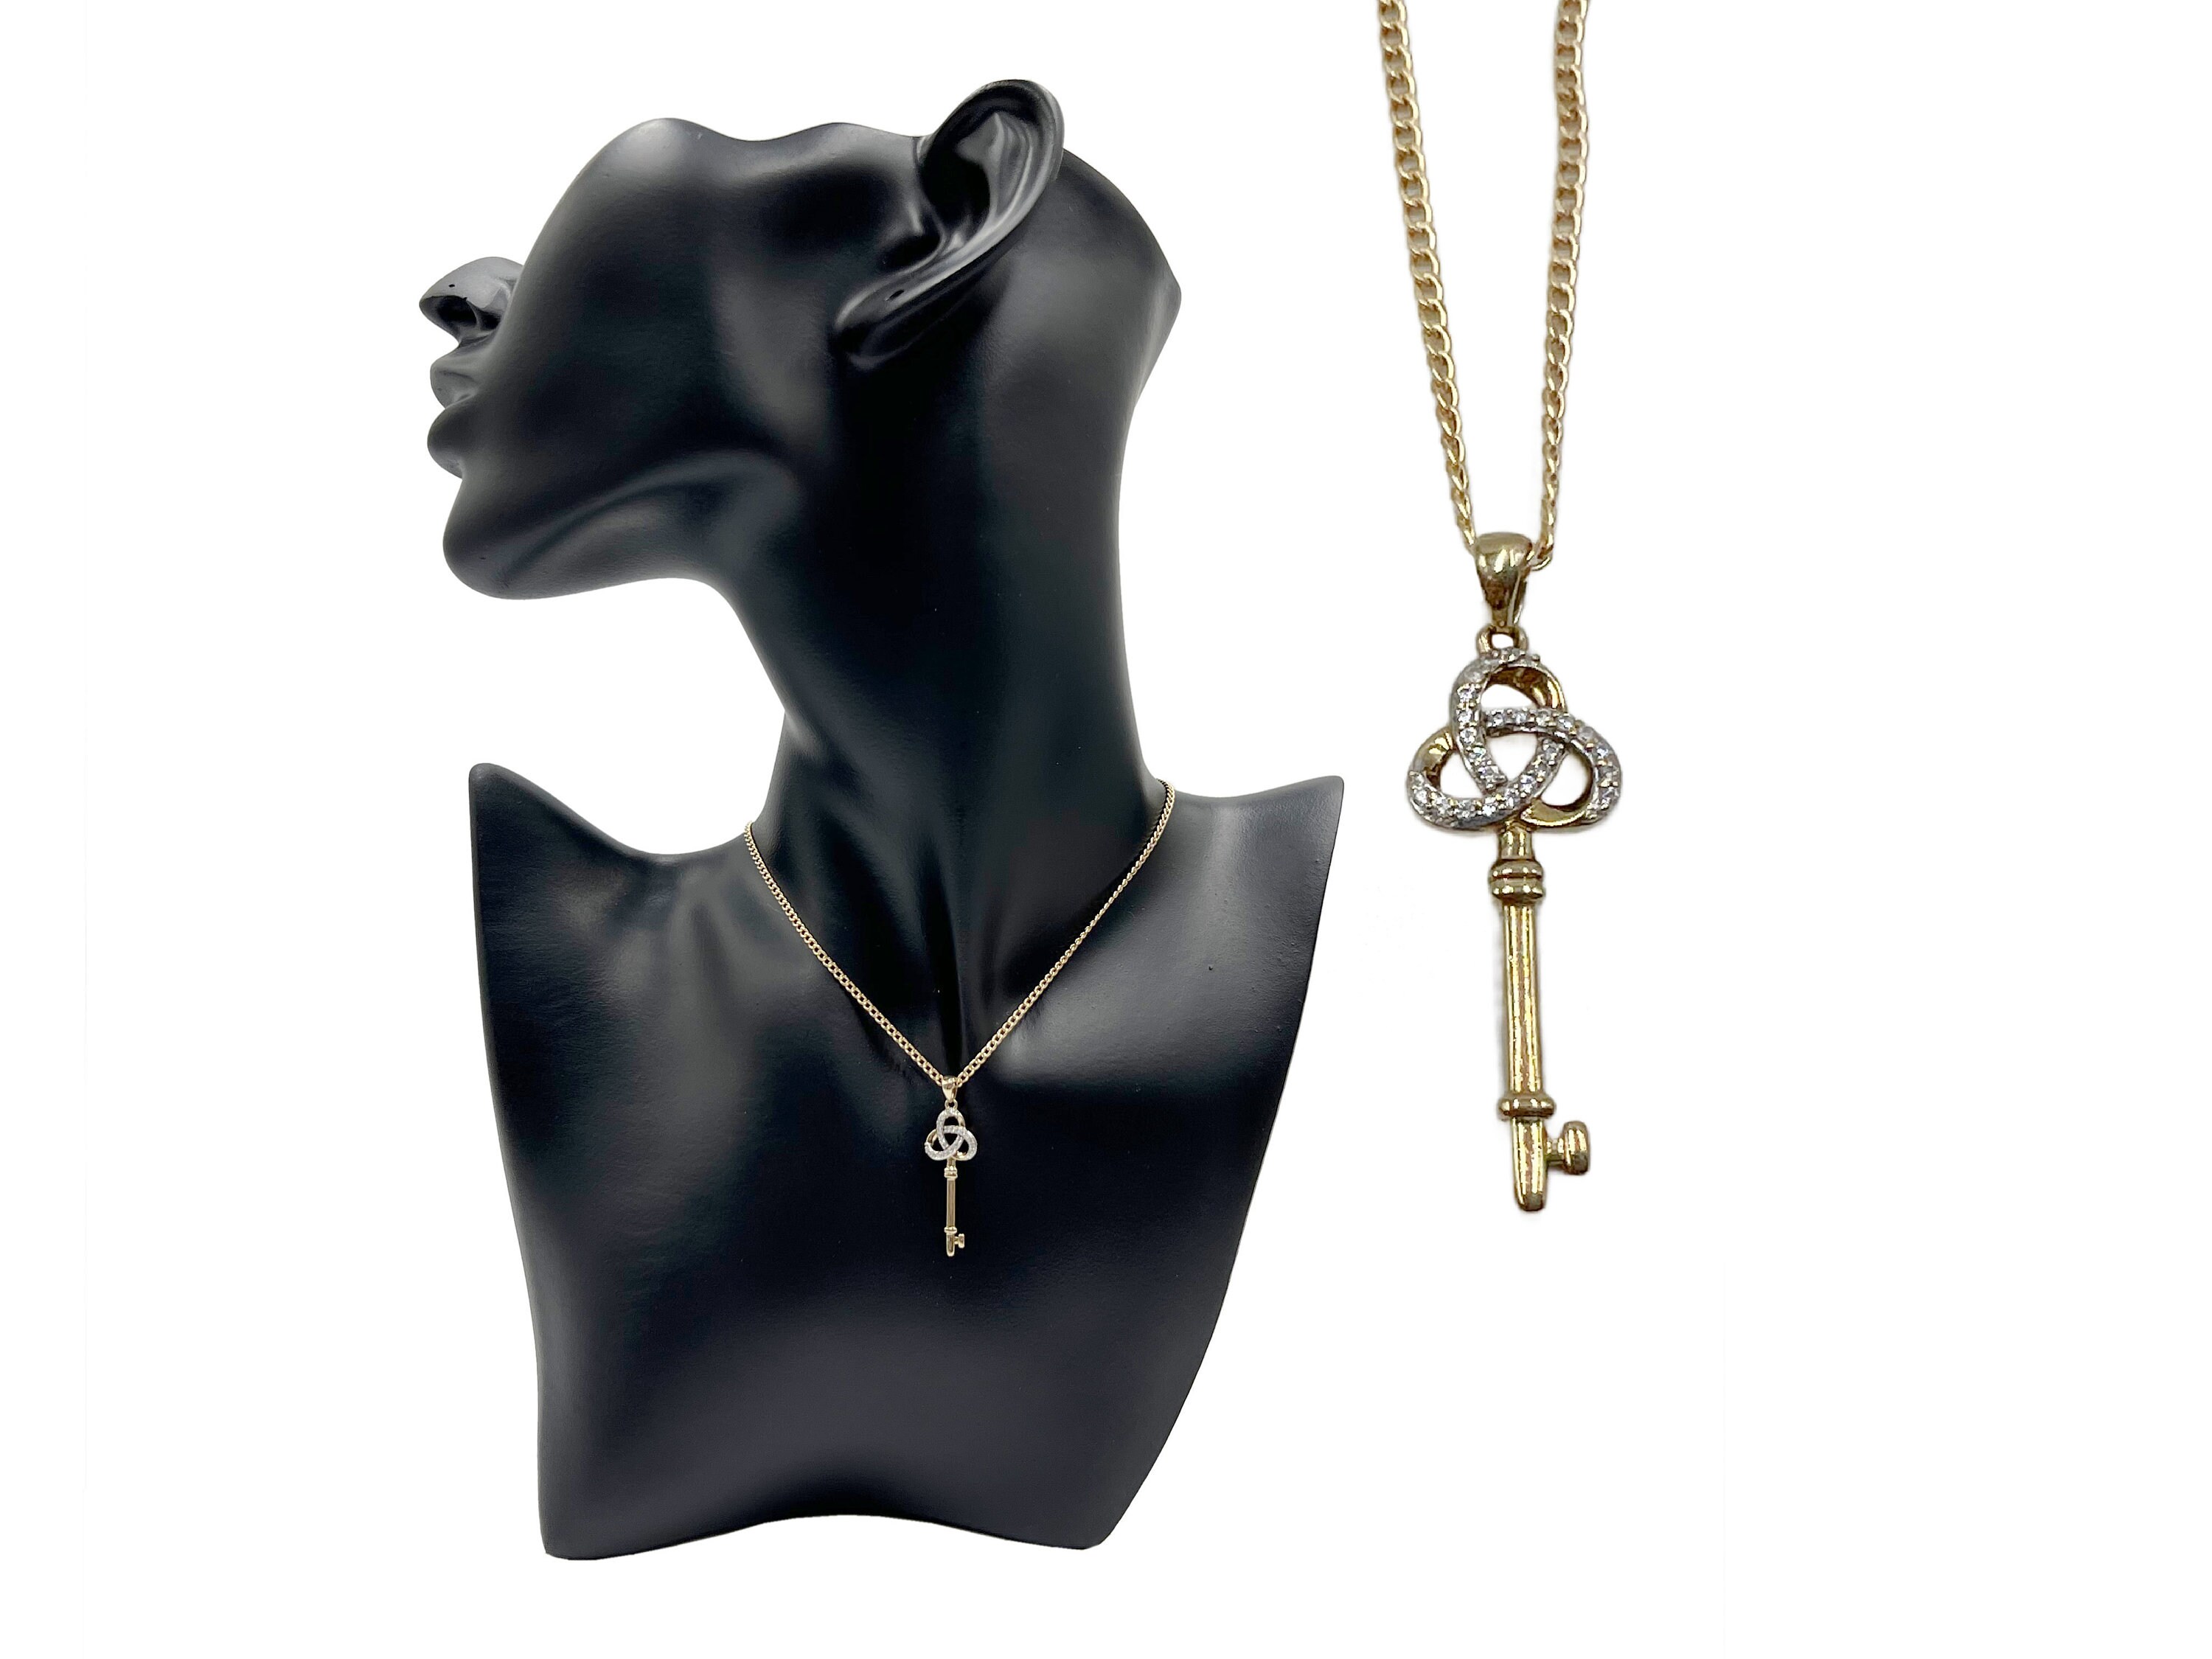 Gold Lock & Key Necklace – Tres Designs Jewelry